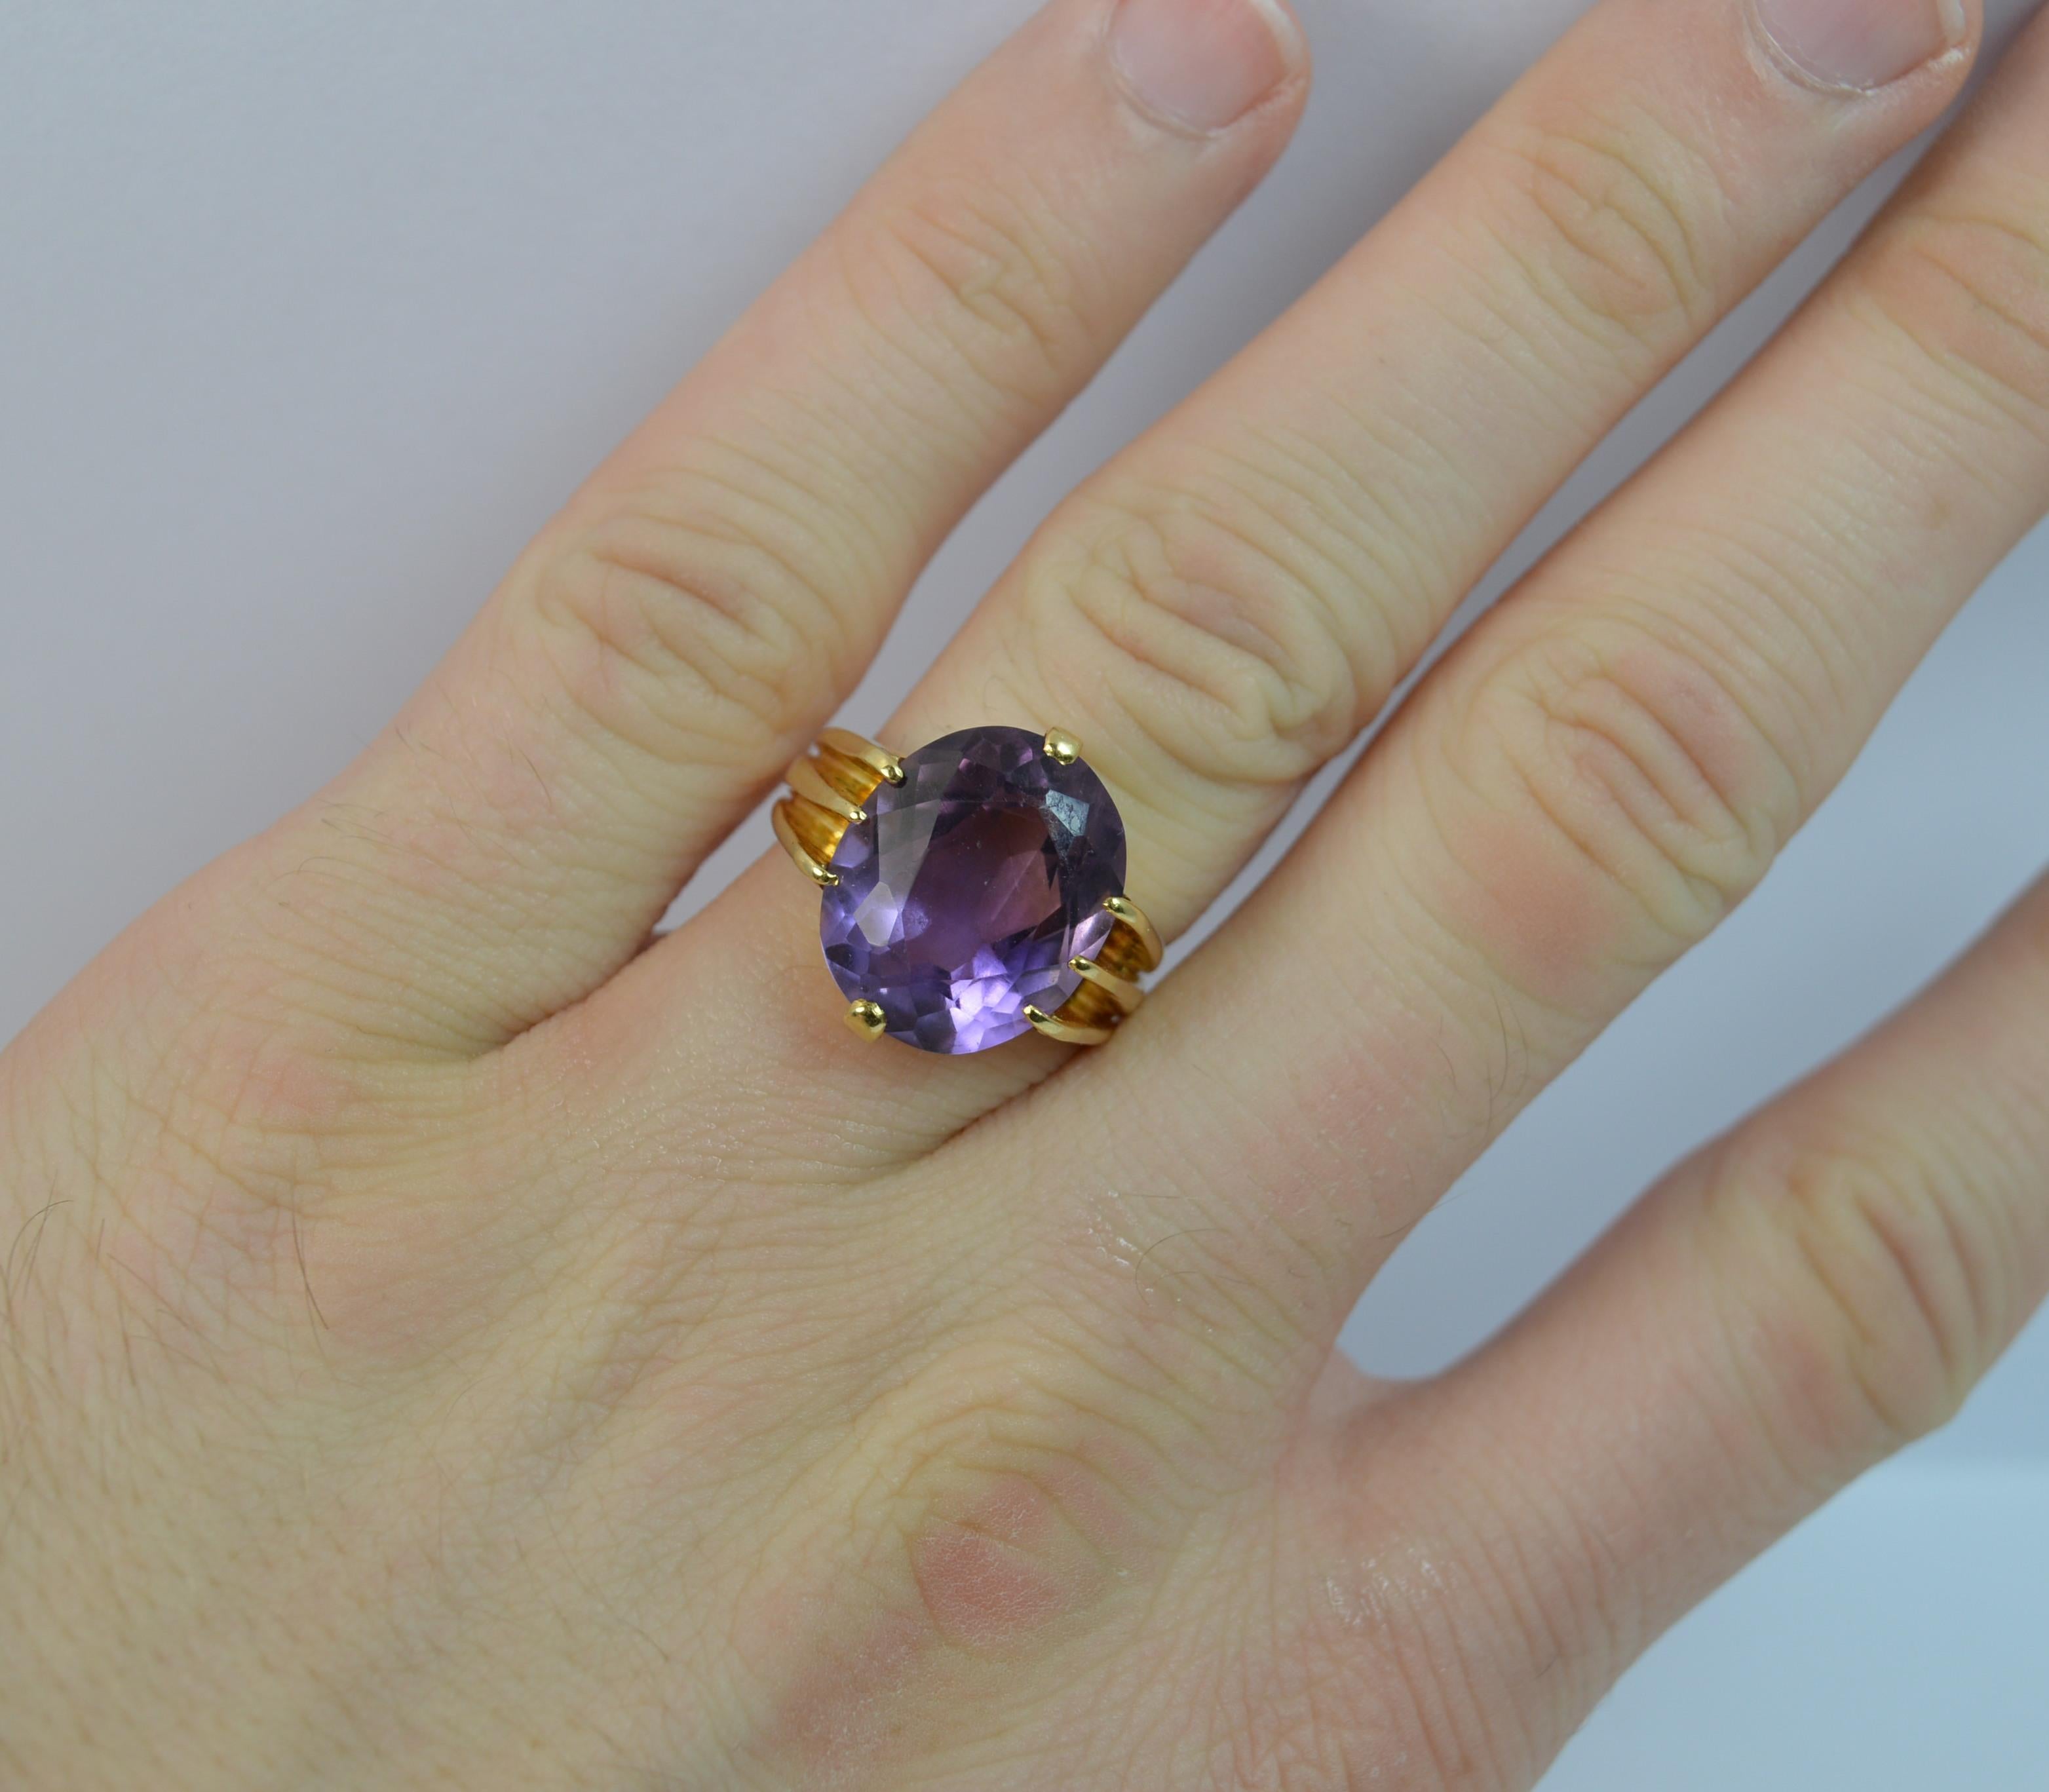 
A true Victorian period ring. 

Solid and substantial 18 carat yellow gold ring.

Set with a single oval cut amethyst to the centre in an eight claw mount. 

12mm x 15mm amethyst approx.

CONDITION ; Very good. Securely set amethyst. Clean and